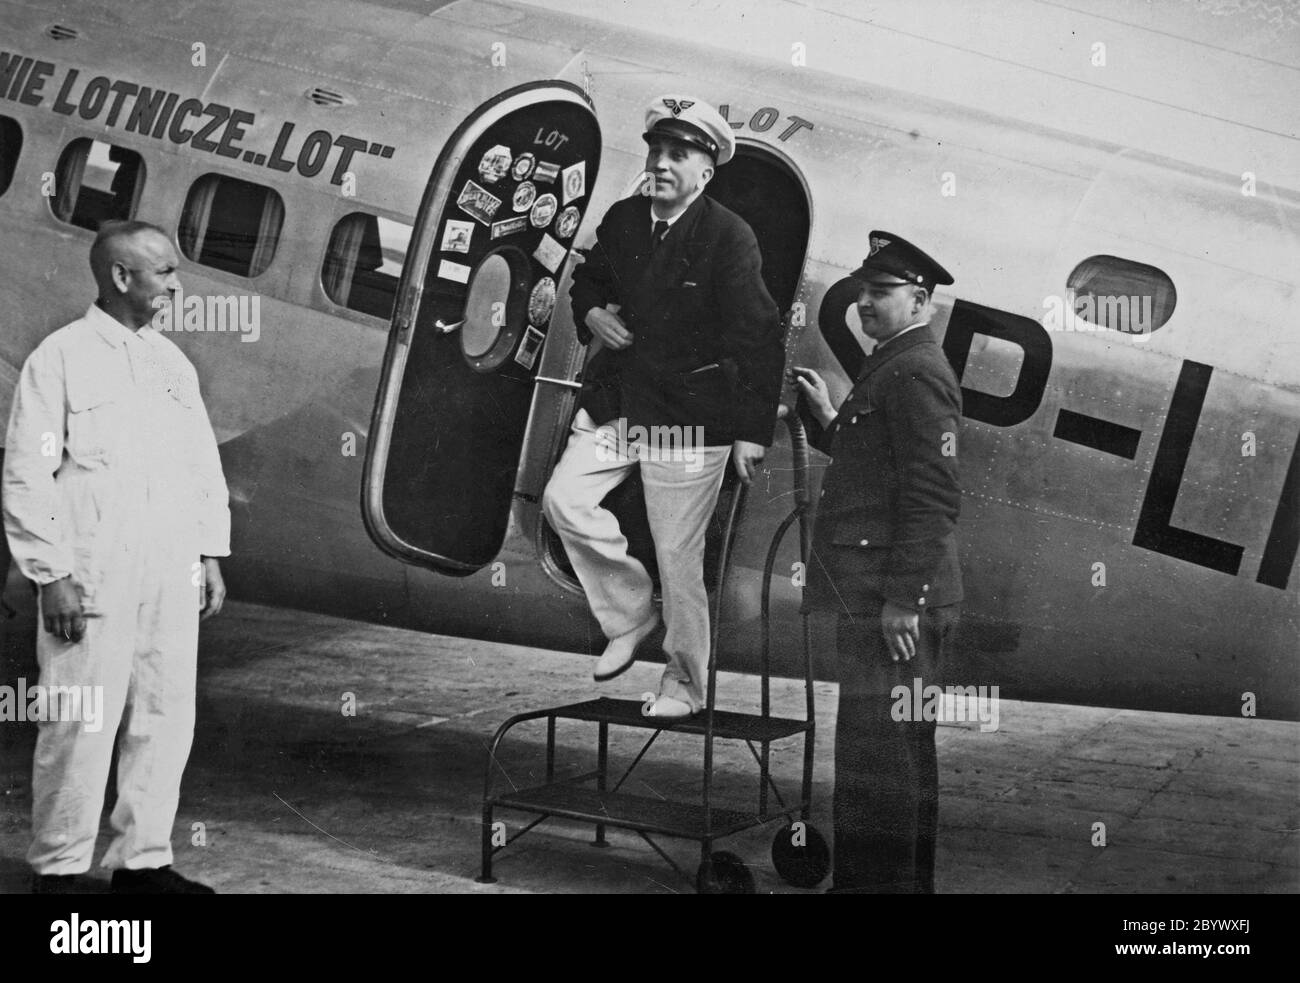 Flight PLL LOT director Wacław Makowski on the Lockheed L-14 Super Electra aircraft on the route Los Angeles-Central America-South America-Atlantic-Africa-Rome. PLL LOT Director pilot Wacław Makowski gets off the Lockheed L-14 super Electra; Warsaw, June 5, 1938. Stock Photo